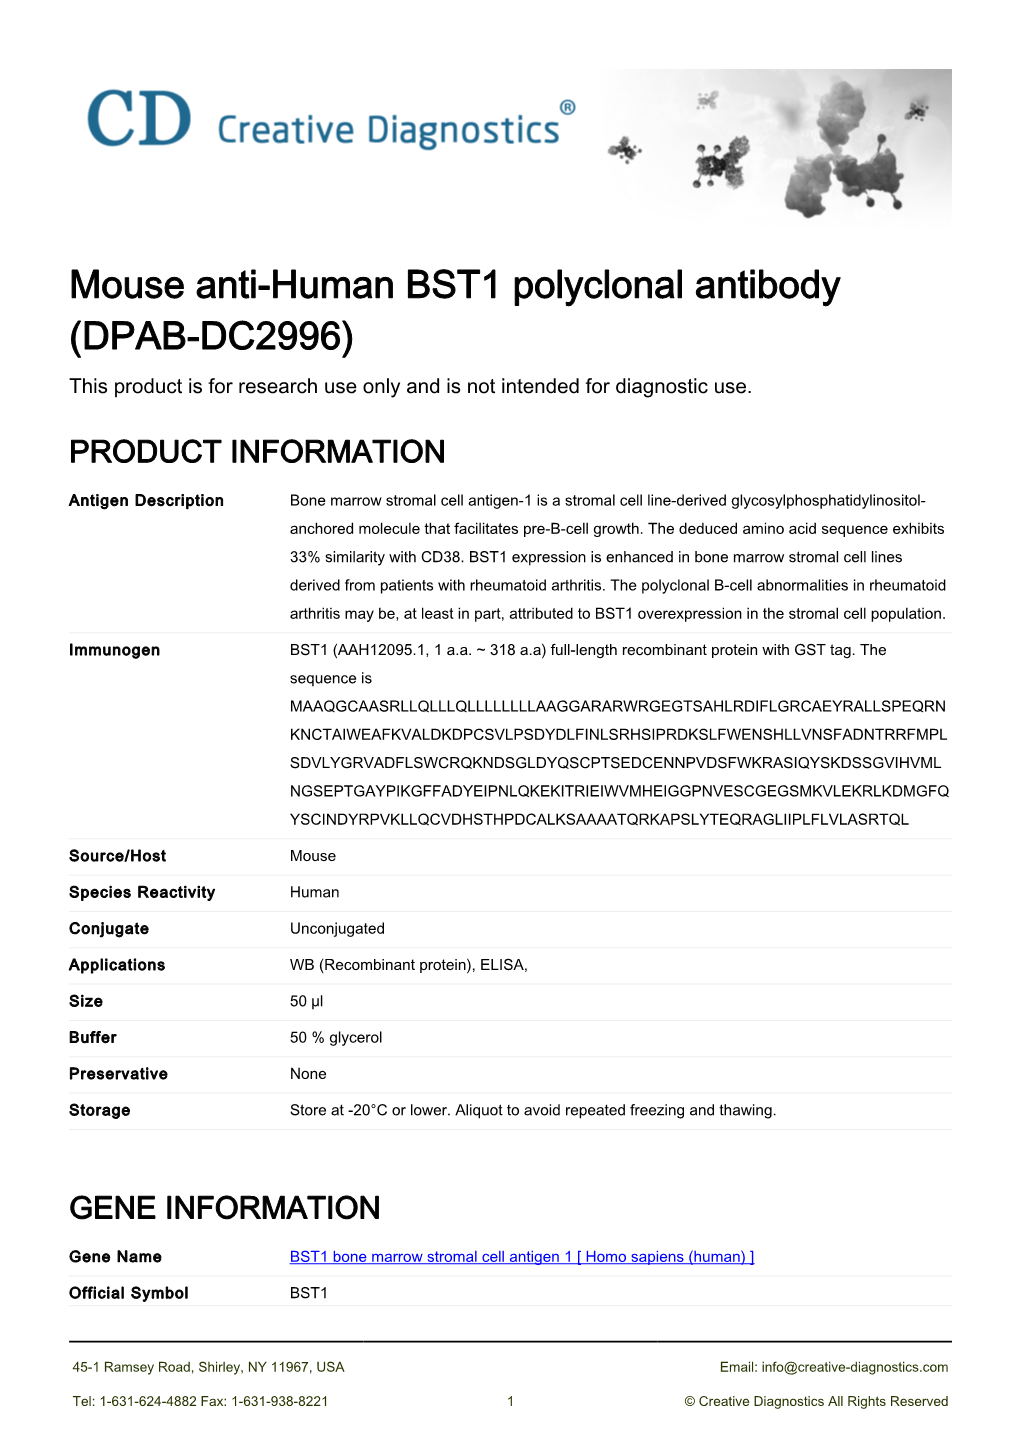 Mouse Anti-Human BST1 Polyclonal Antibody (DPAB-DC2996) This Product Is for Research Use Only and Is Not Intended for Diagnostic Use